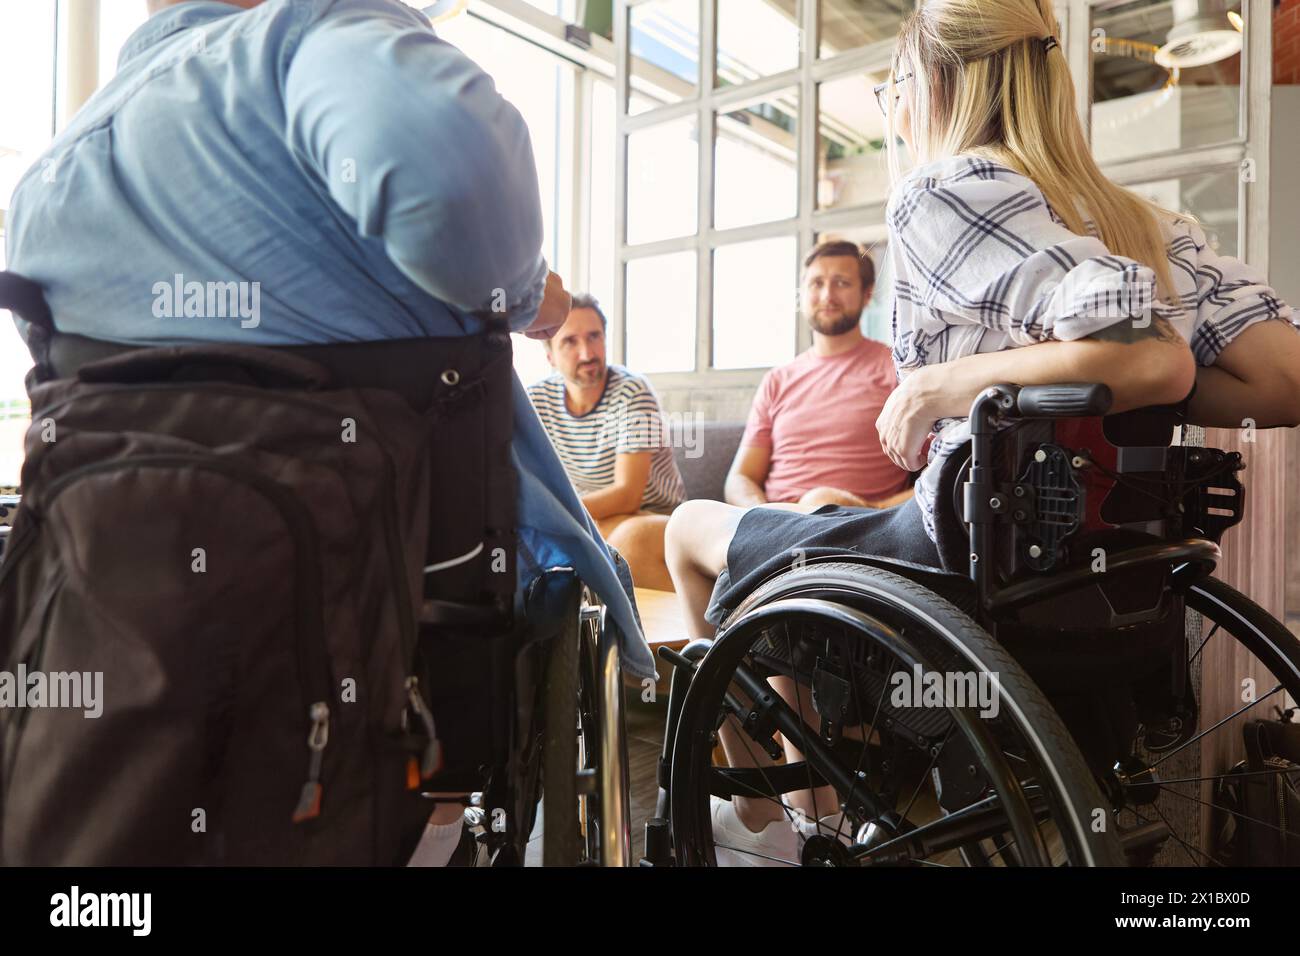 A person using a wheelchair engages in a lively discussion with friends at a sunlit cafÃ©. The image portrays inclusion and social interaction among d Stock Photo